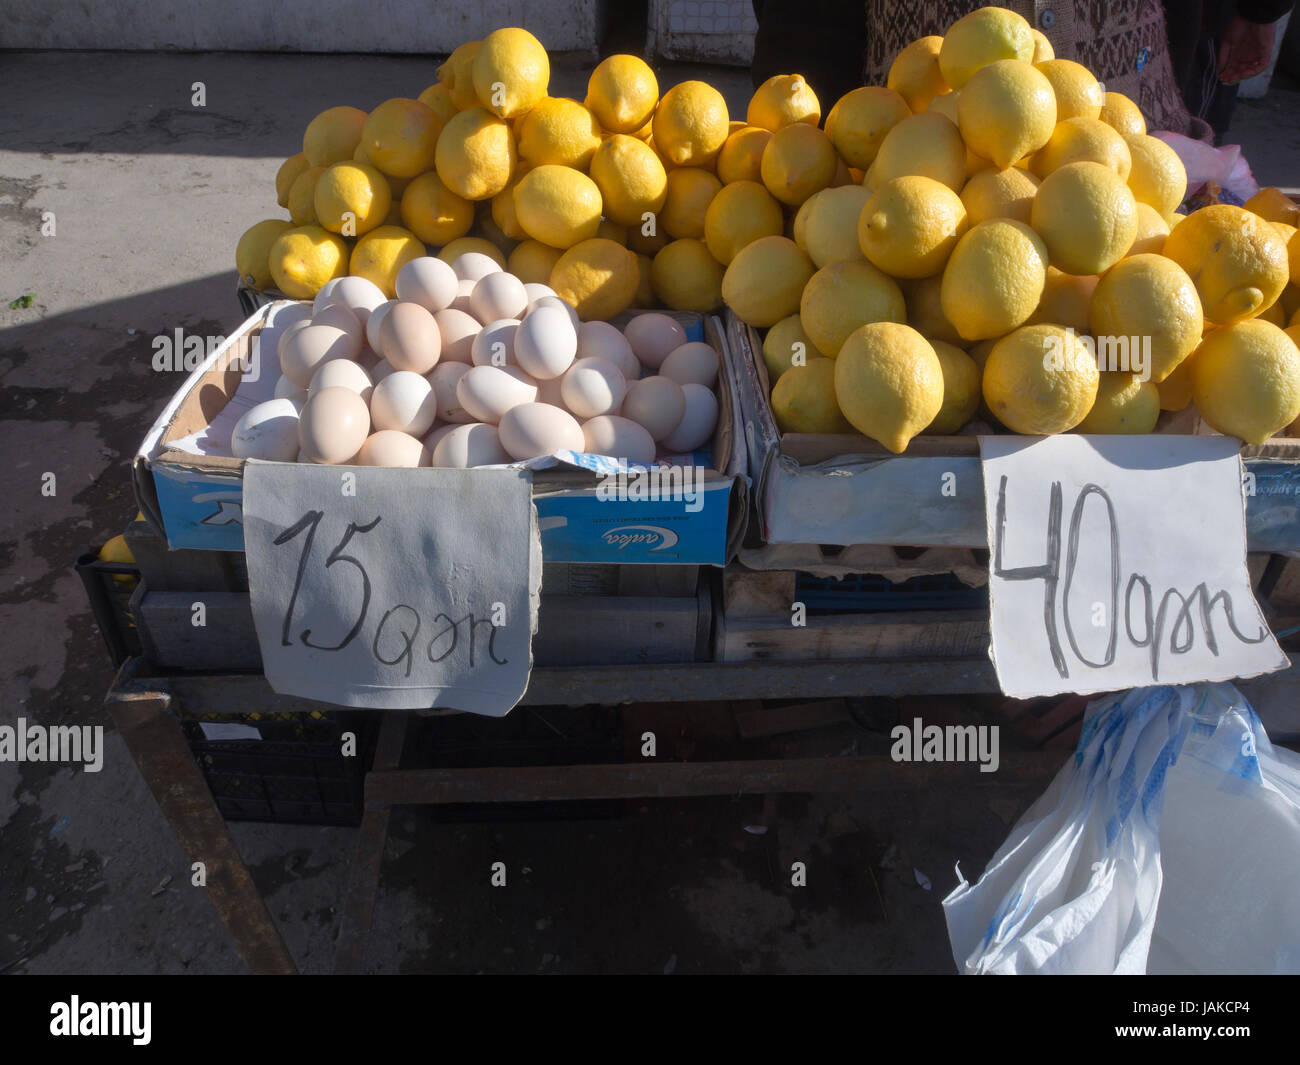 The daily outdoors market in Şəki (transcribed Shaki or Sheki) in northern Azerbaijan offers produce from a fertile agricultural region Stock Photo